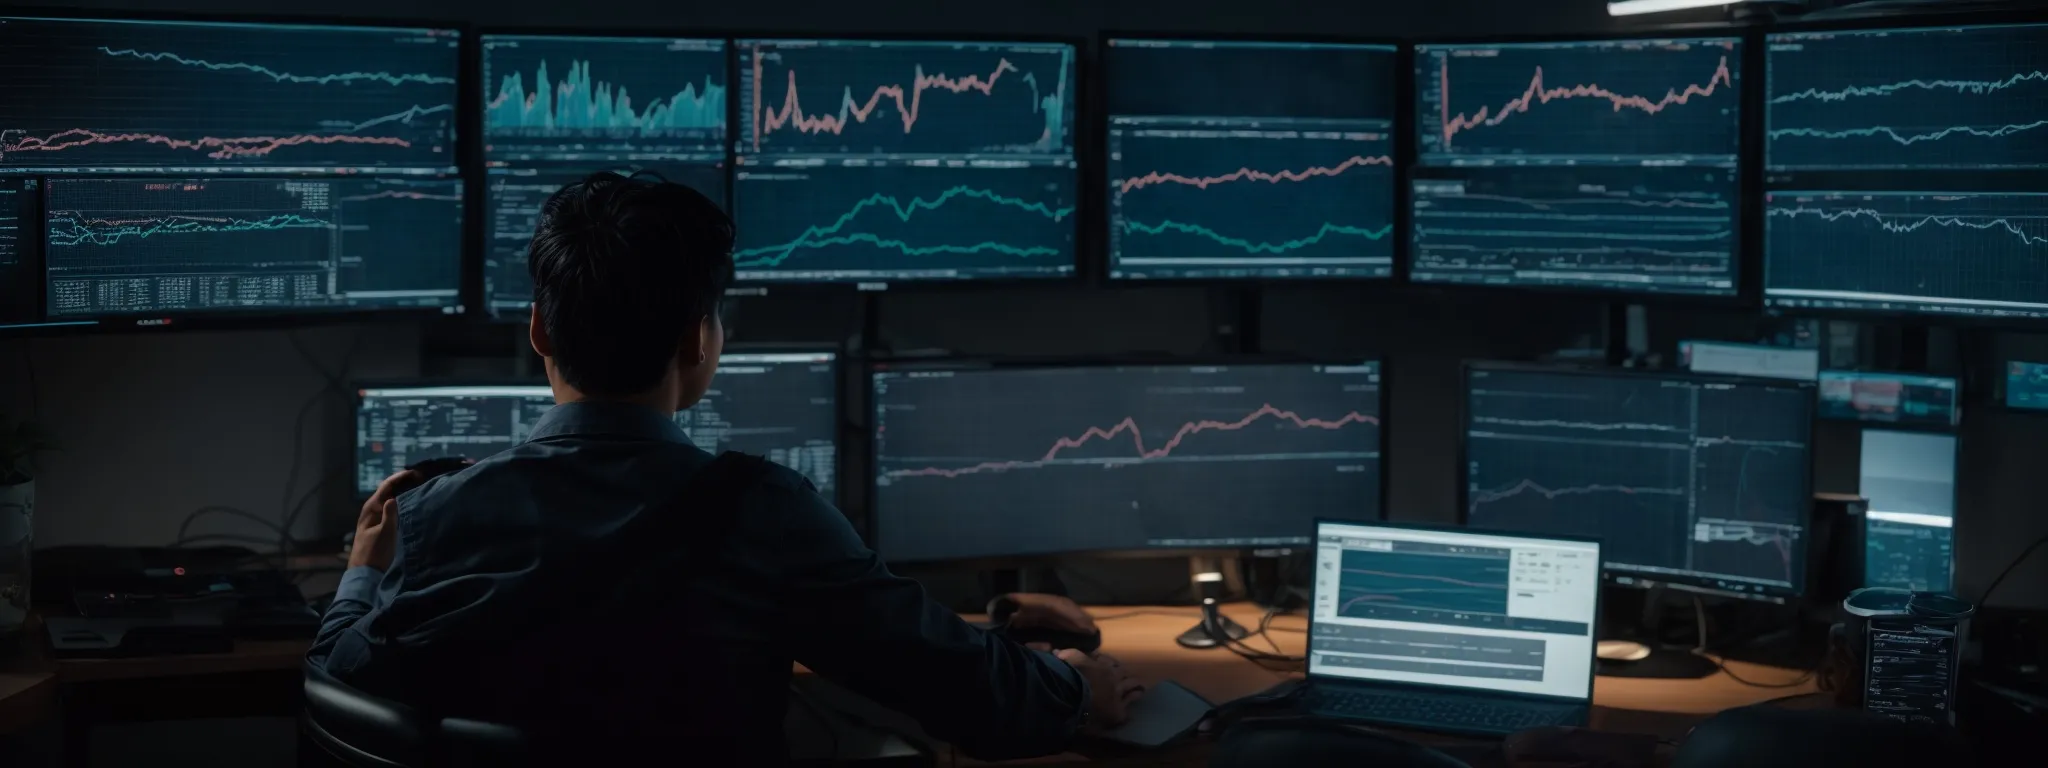 a person sitting before dual monitors displays graphs and analytics, deeply focused on optimizing a website's seo strategy.